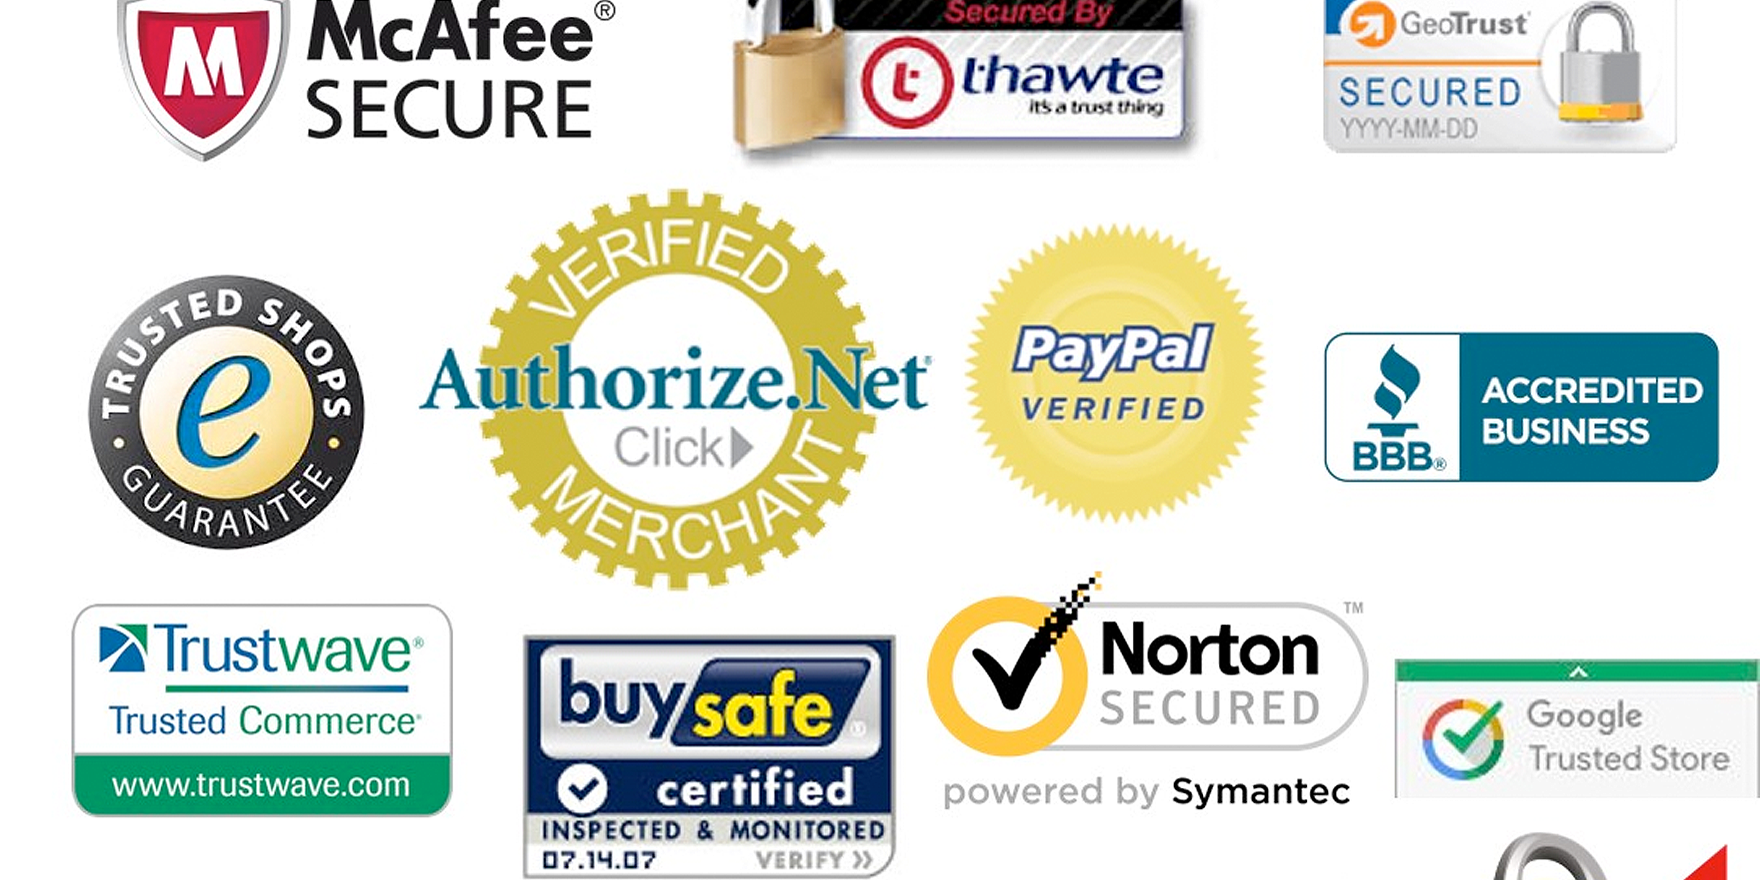 Learn more about SSL Site Seals